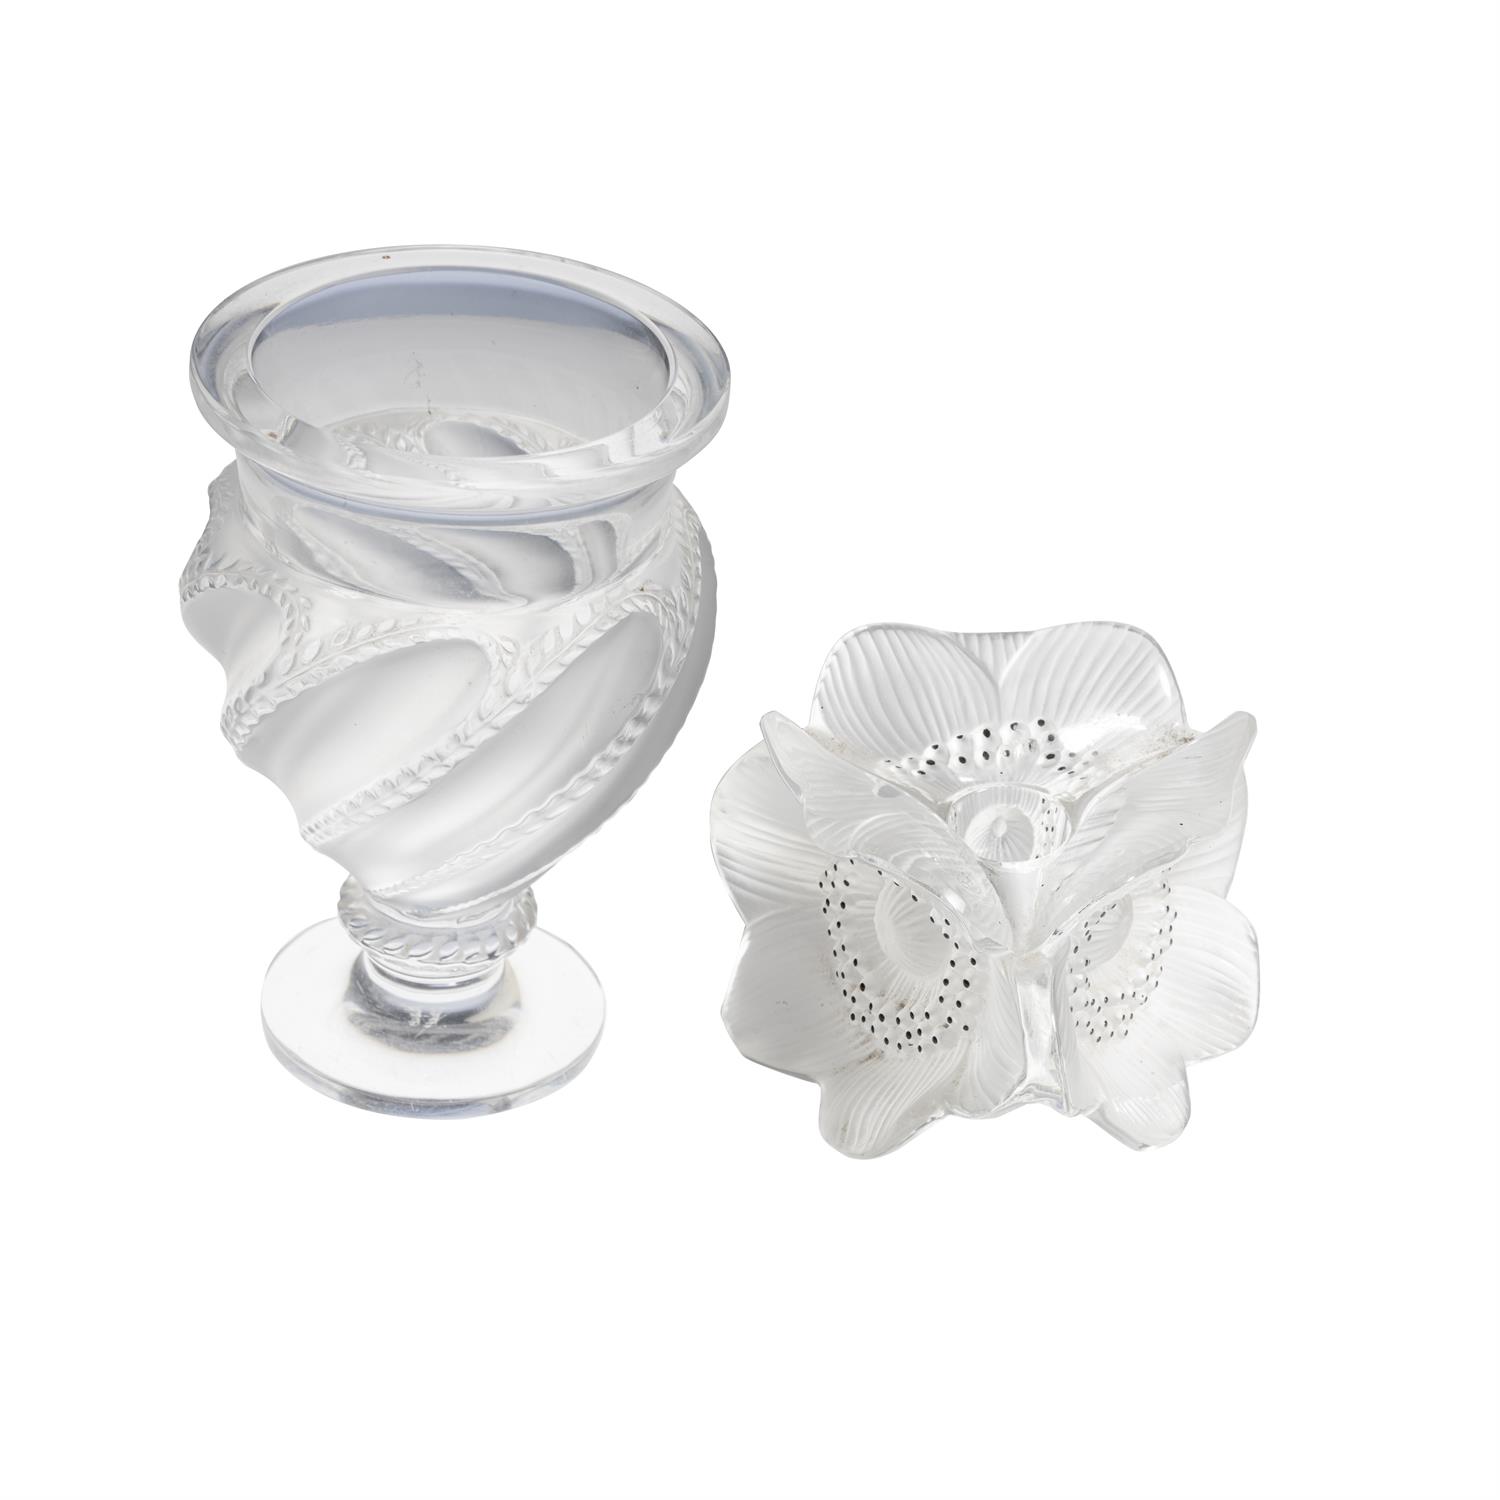 Lalique Ermenonville vase and Anemone flower head candlestick